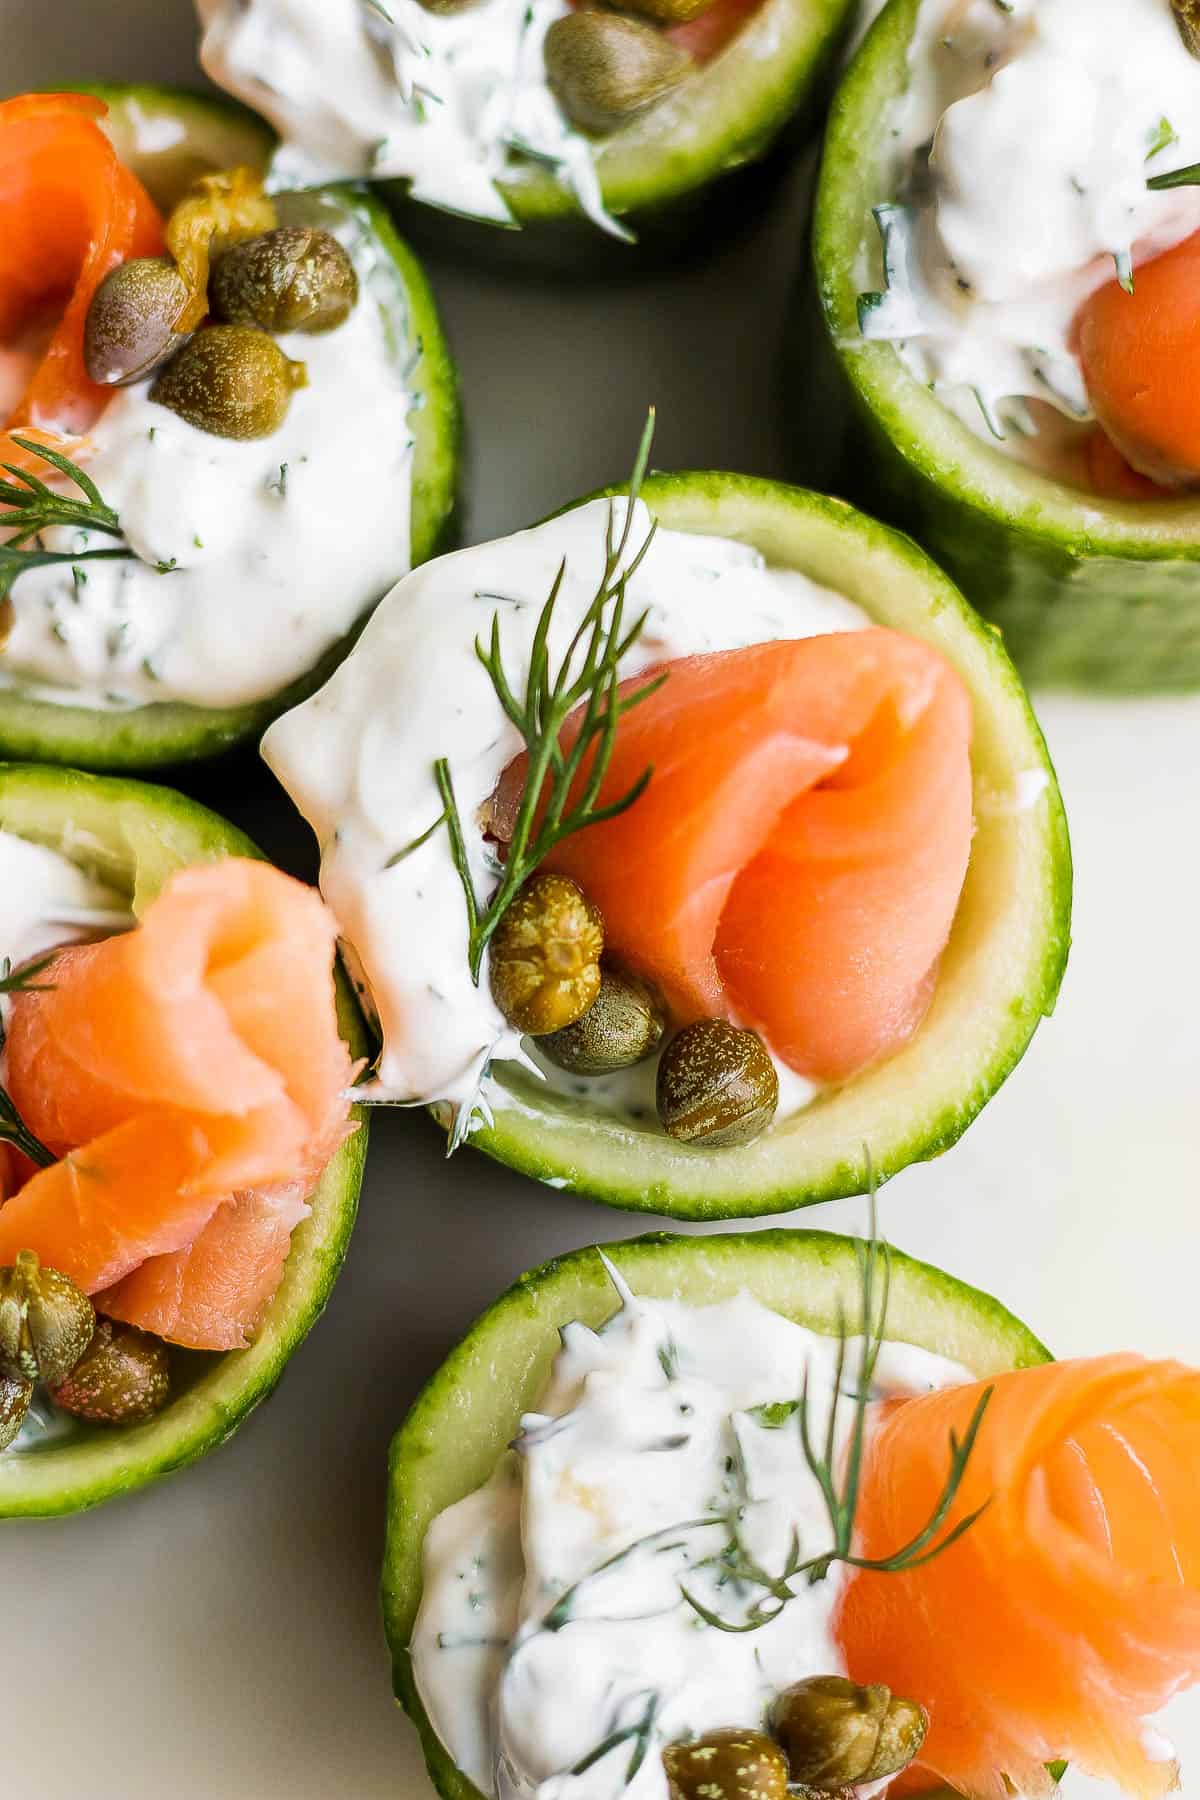 Five cucumber cups filled with dill sauce, three capers, smoked salmon, and a tiny sprig of fresh dill.